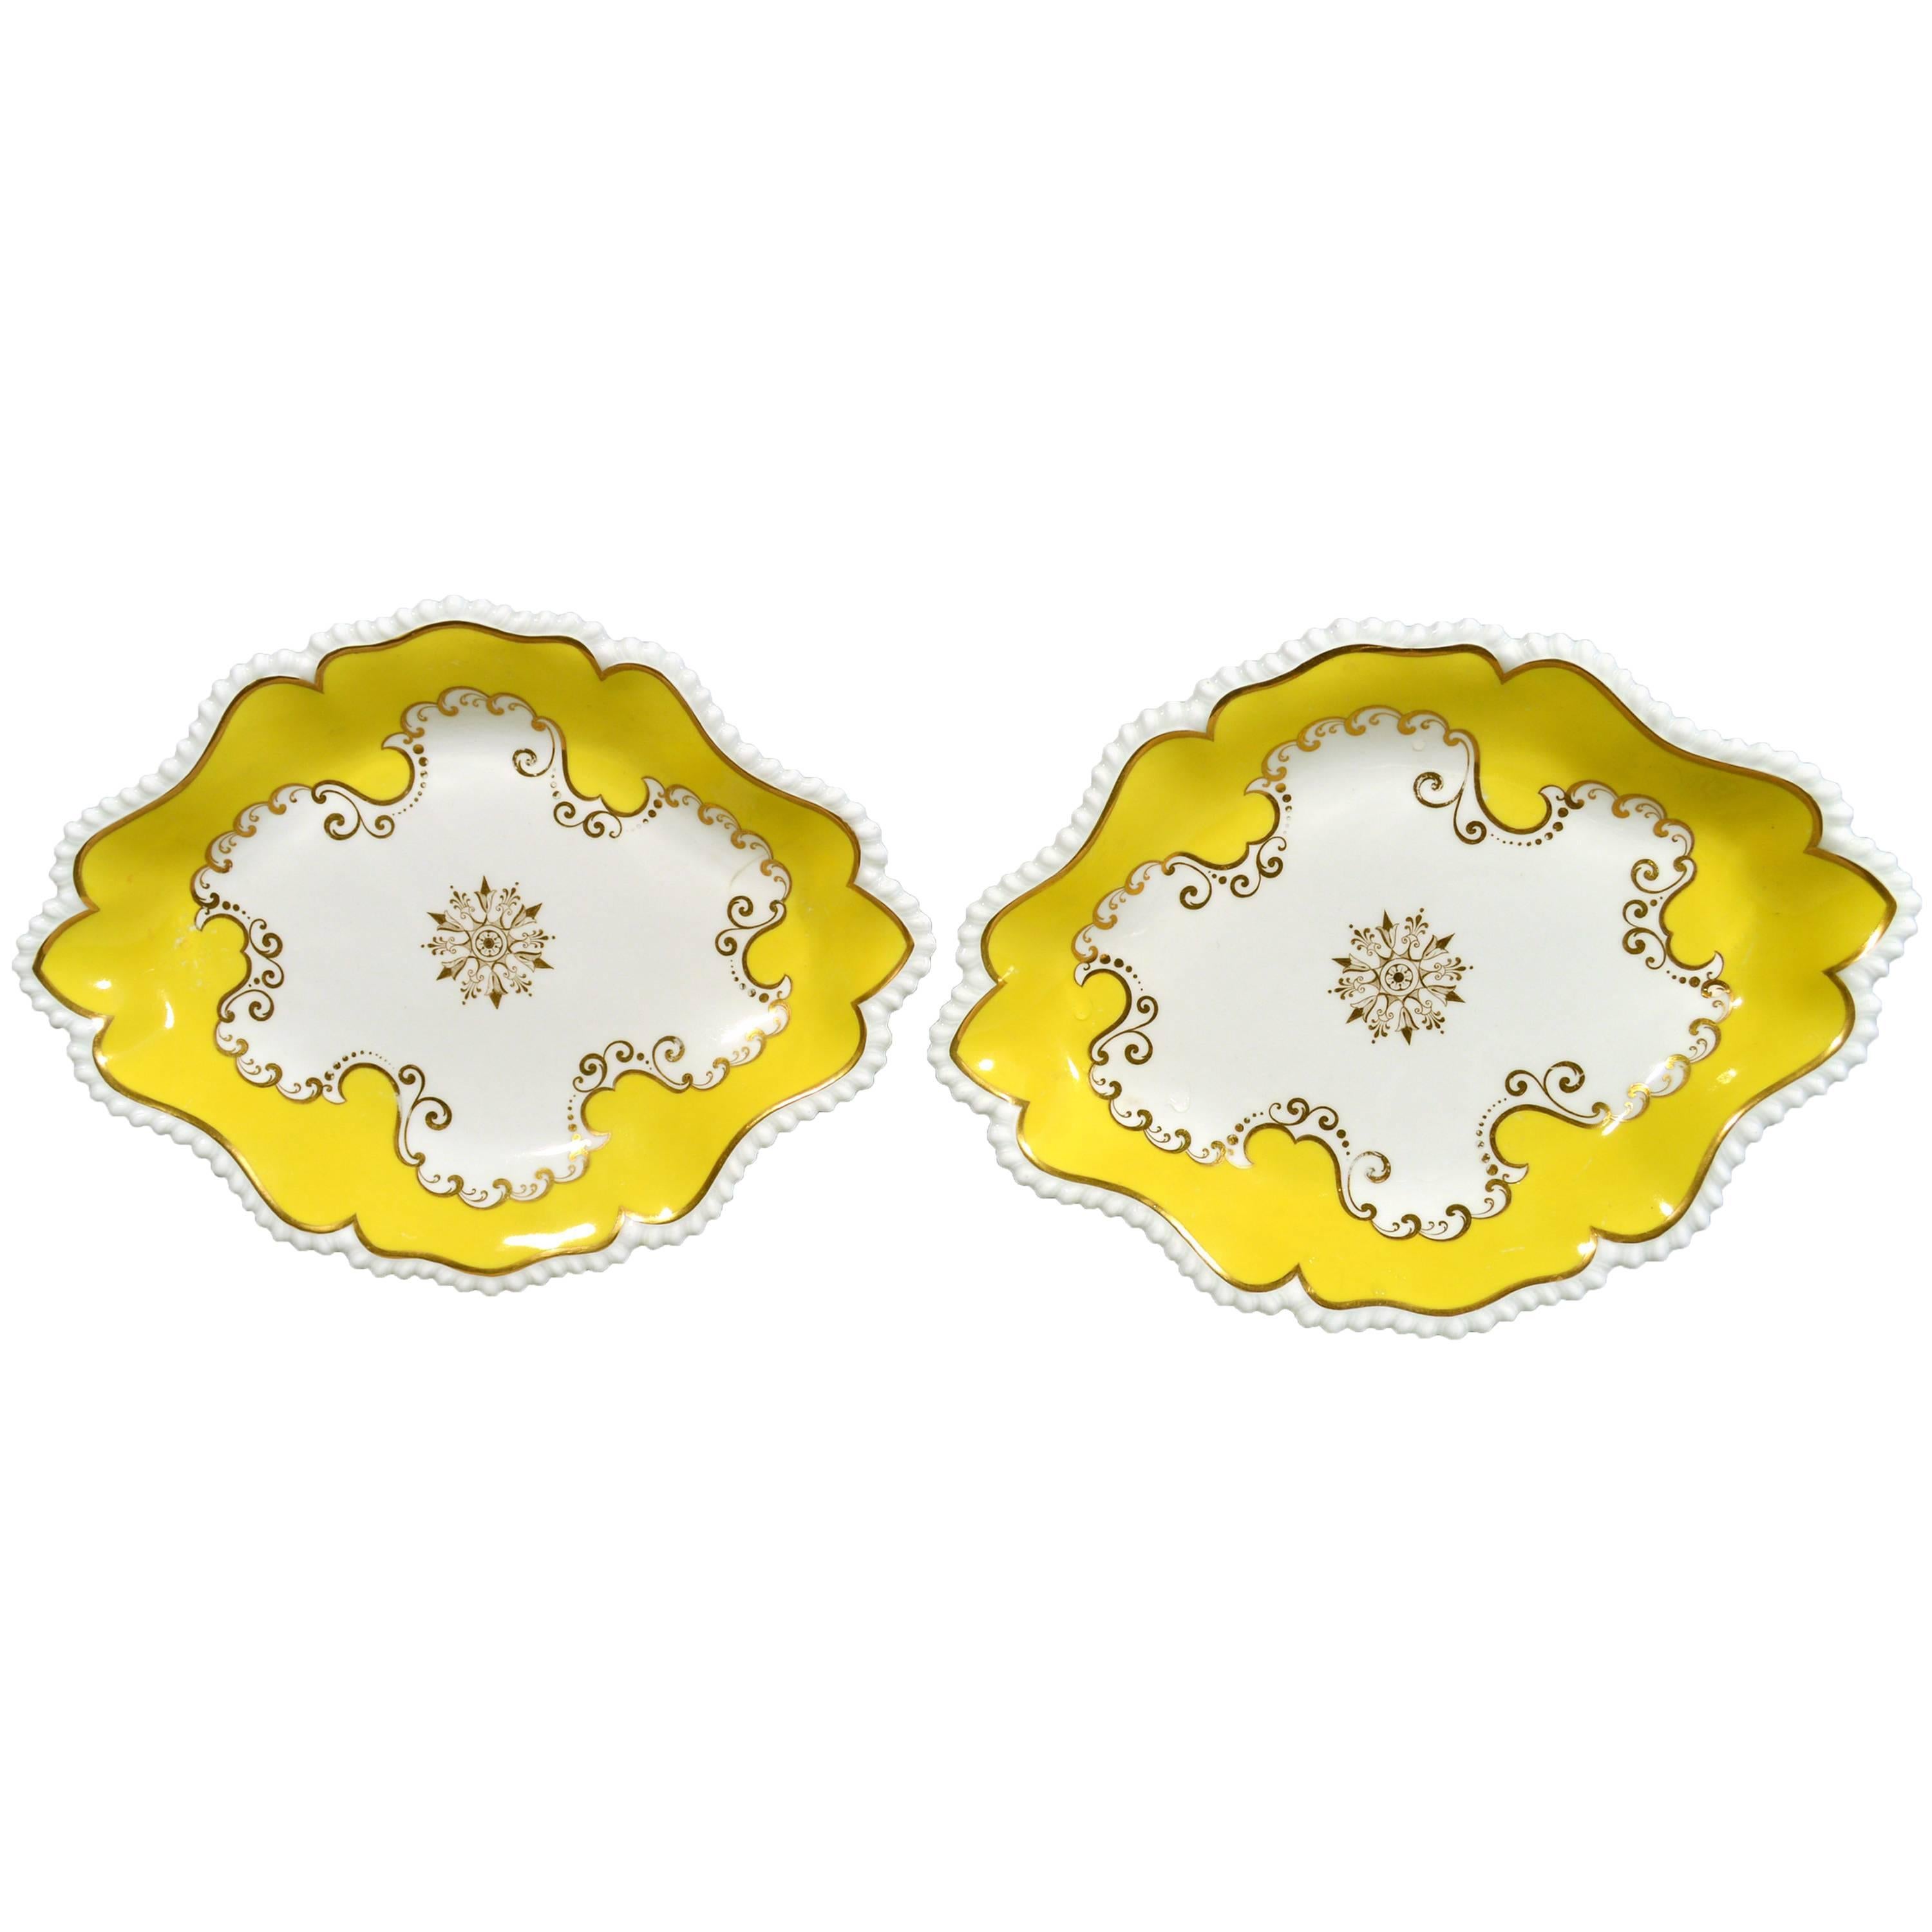 Flight, Barr & Barr Worcester Yellow Oval Porcelain Dishes, circa 1820